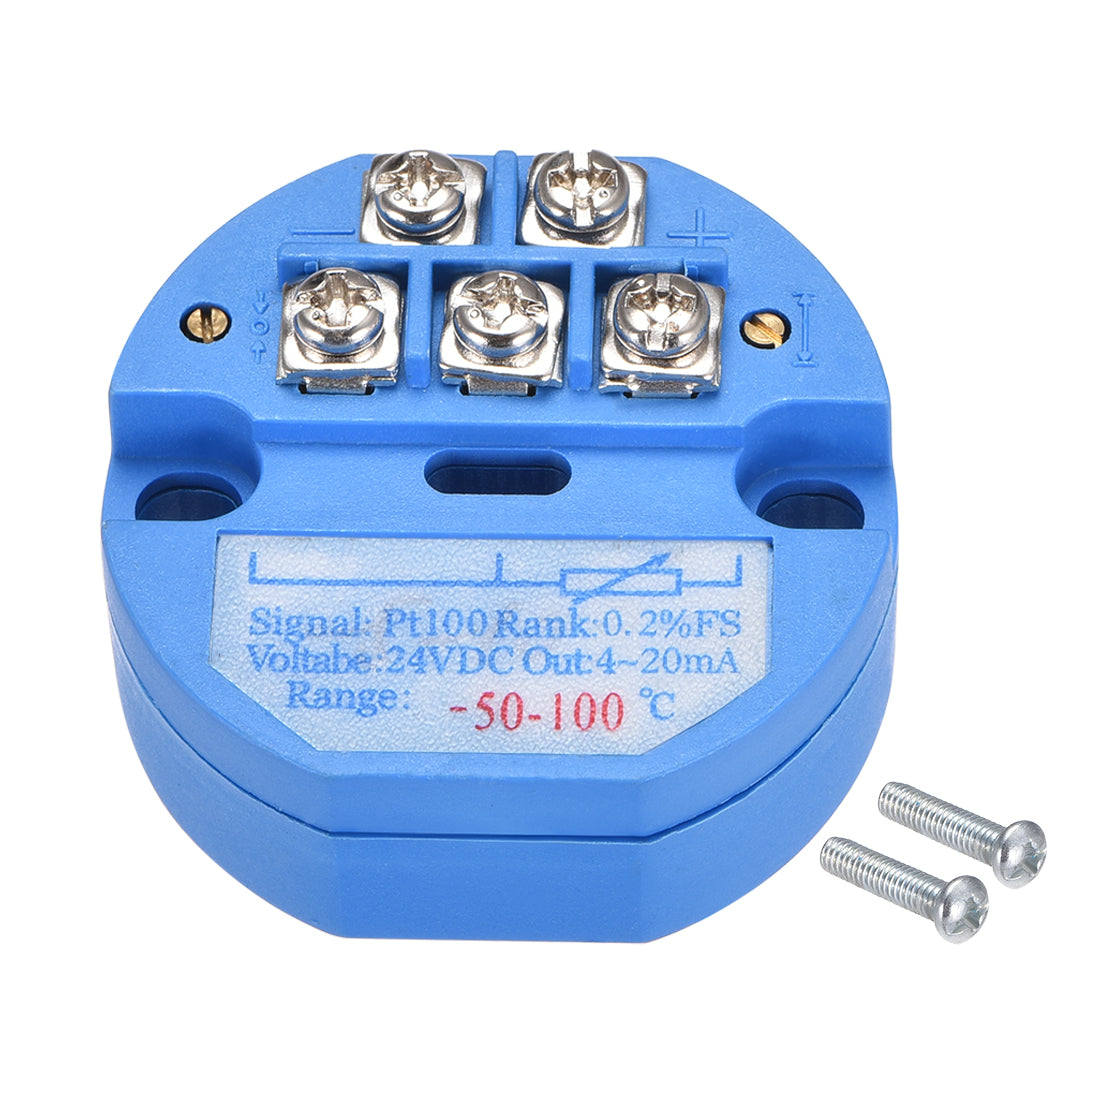 uxcell Uxcell PT100 Temperature Sensor Transmitter 24V DC 4-20mA -50℃ to 100℃